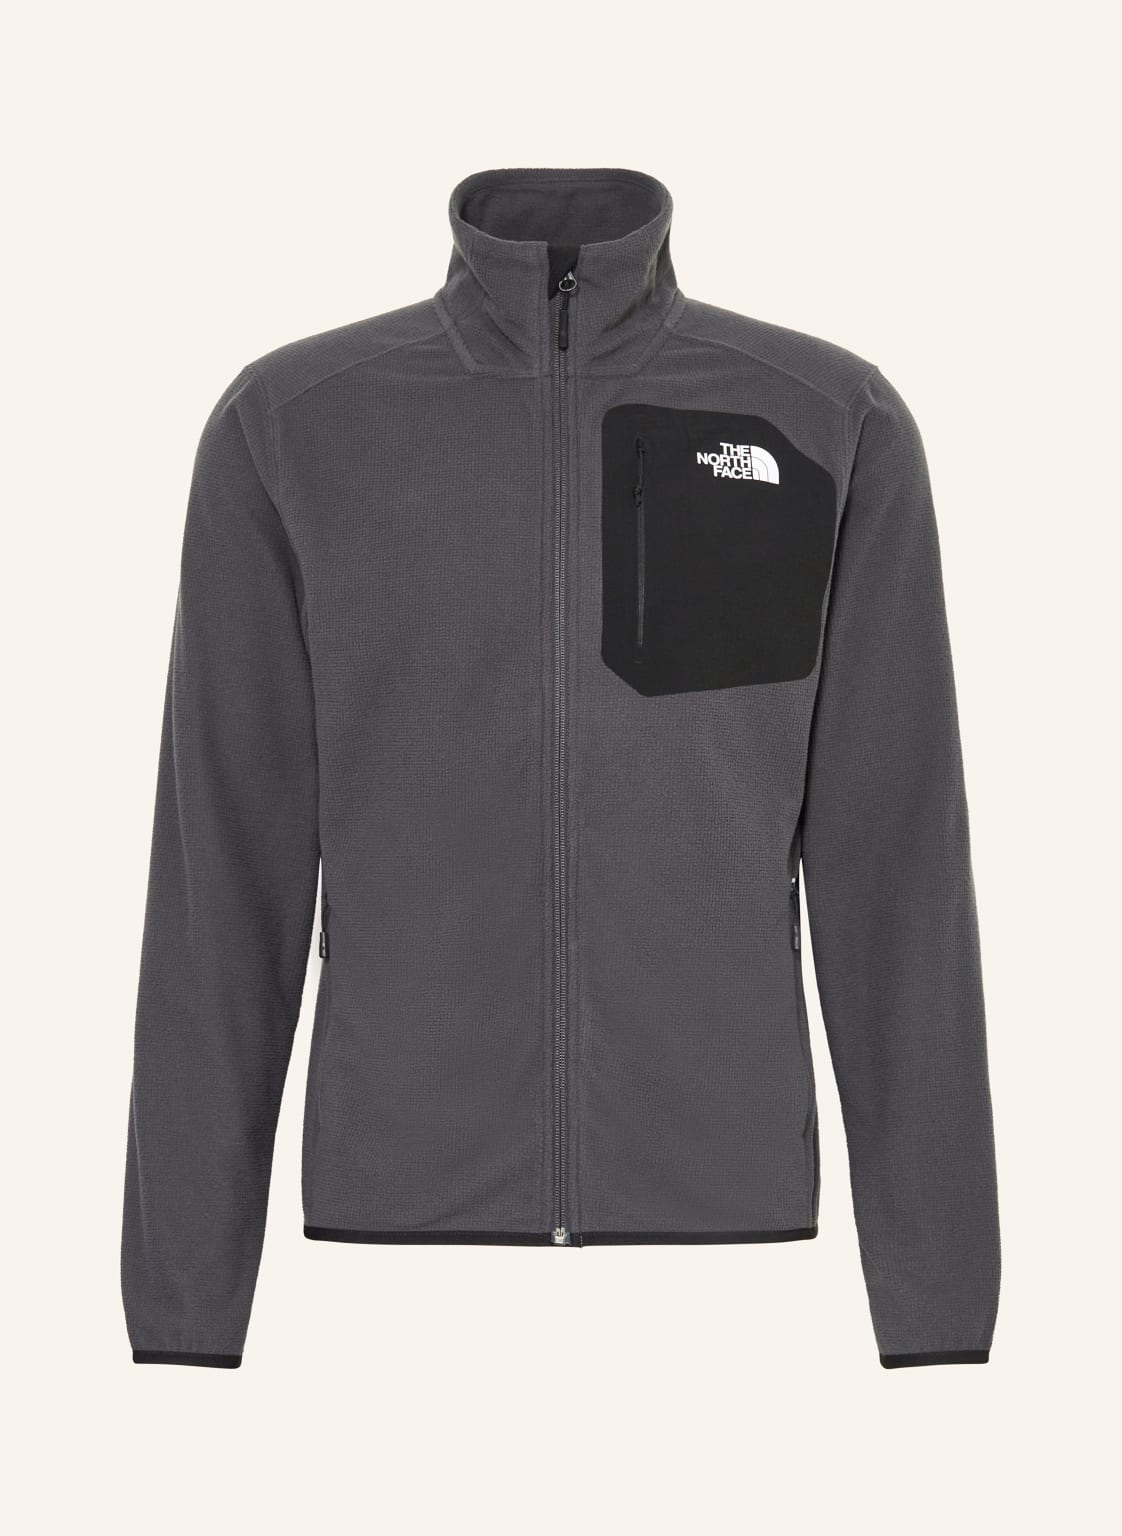 The North Face Fleecejacke Experit grau von The North Face